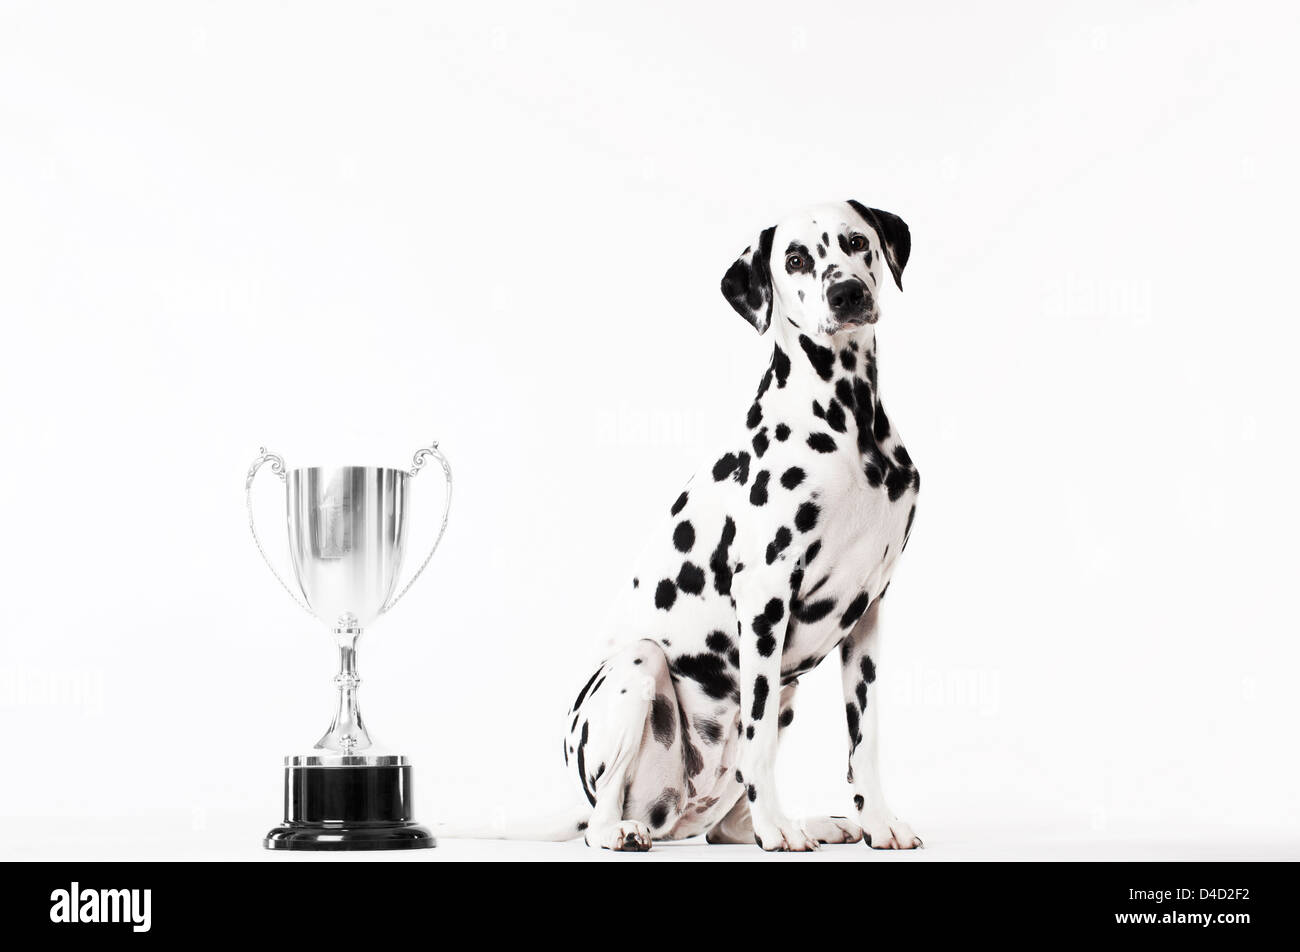 Dog sitting by trophy Stock Photo